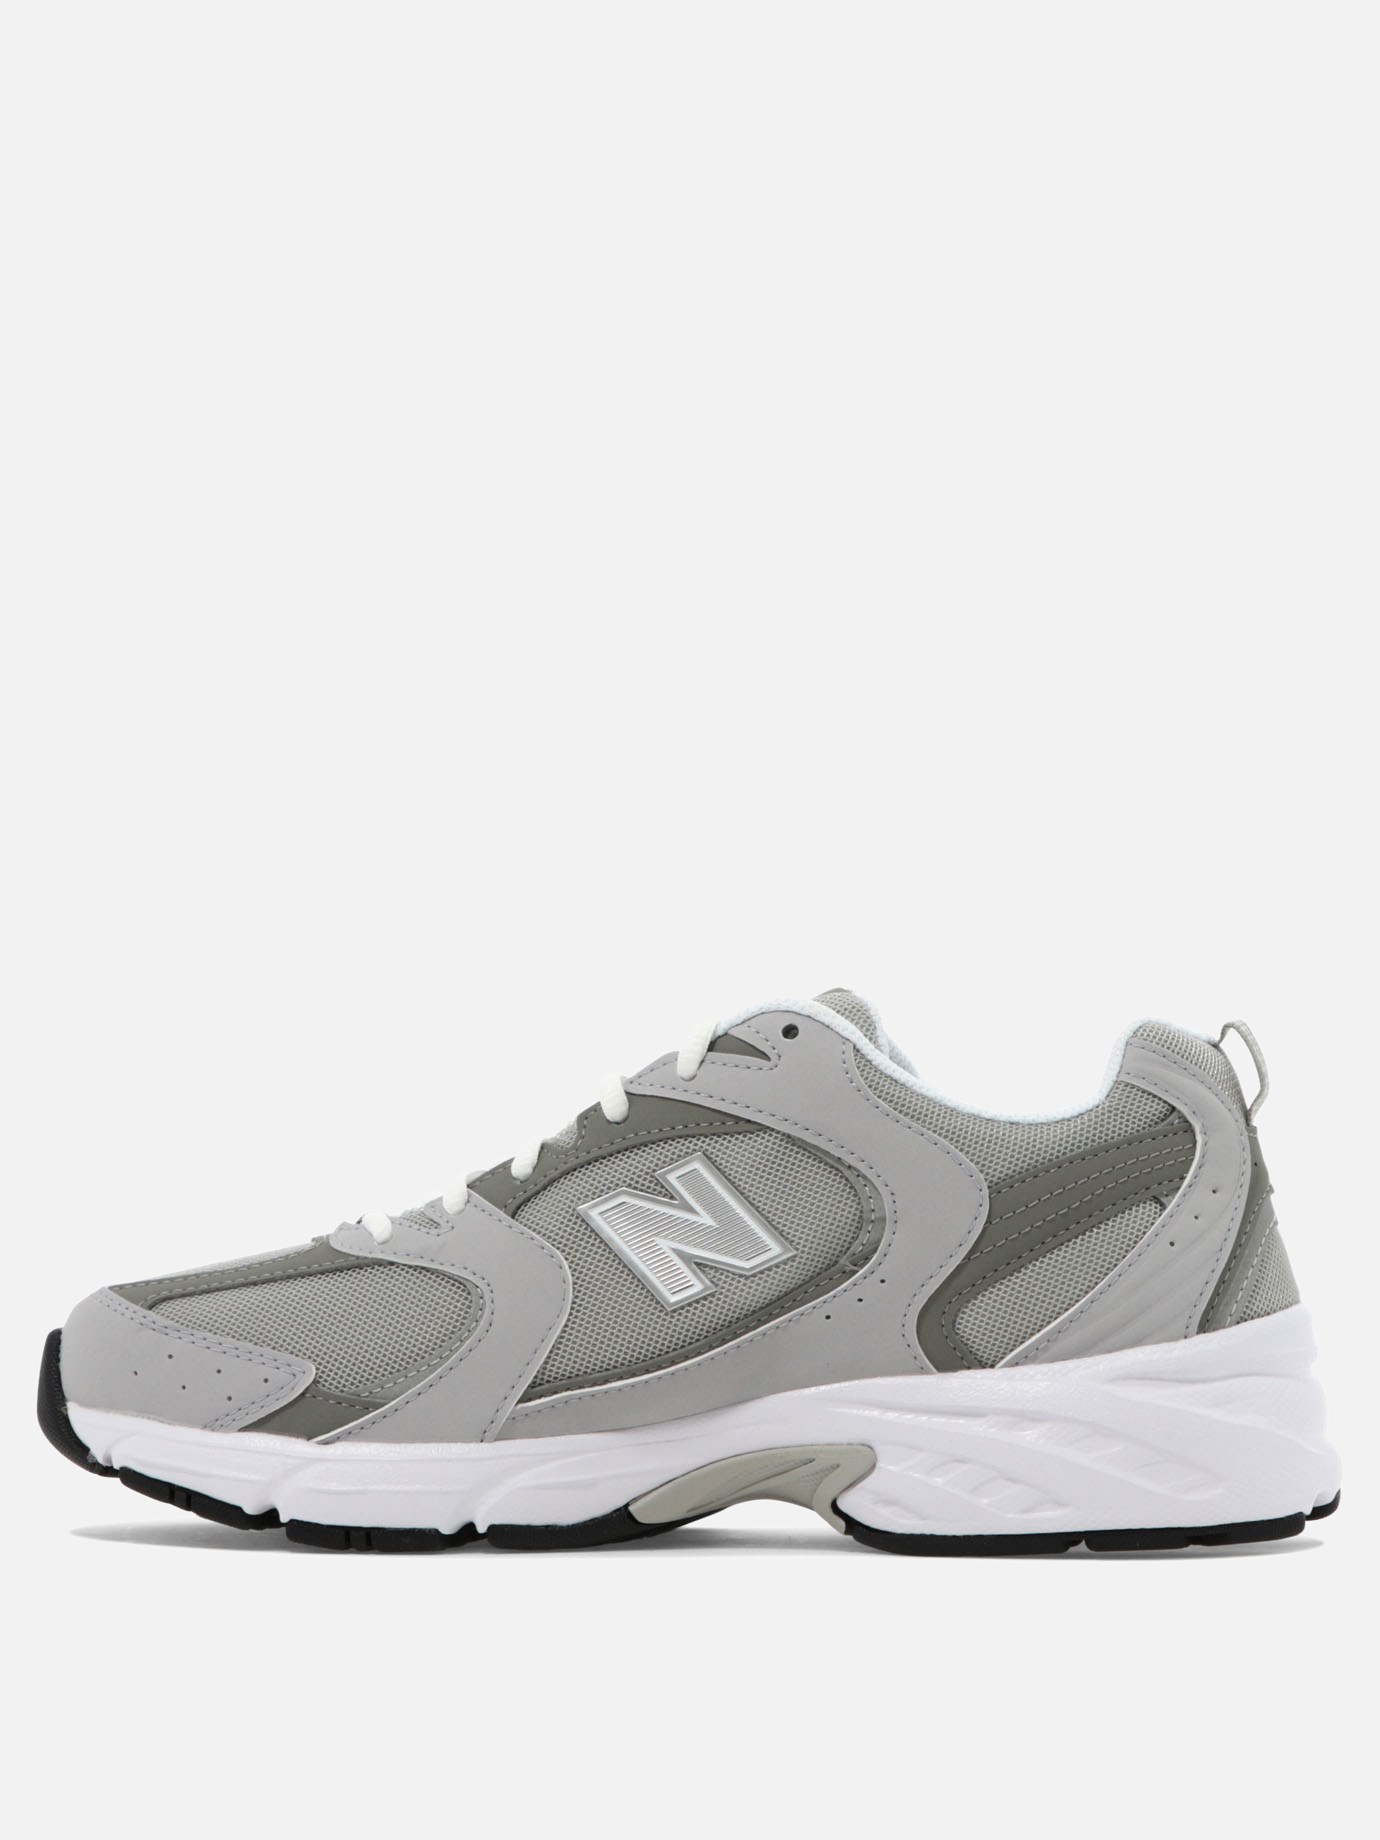 Sneaker  530  by New Balance